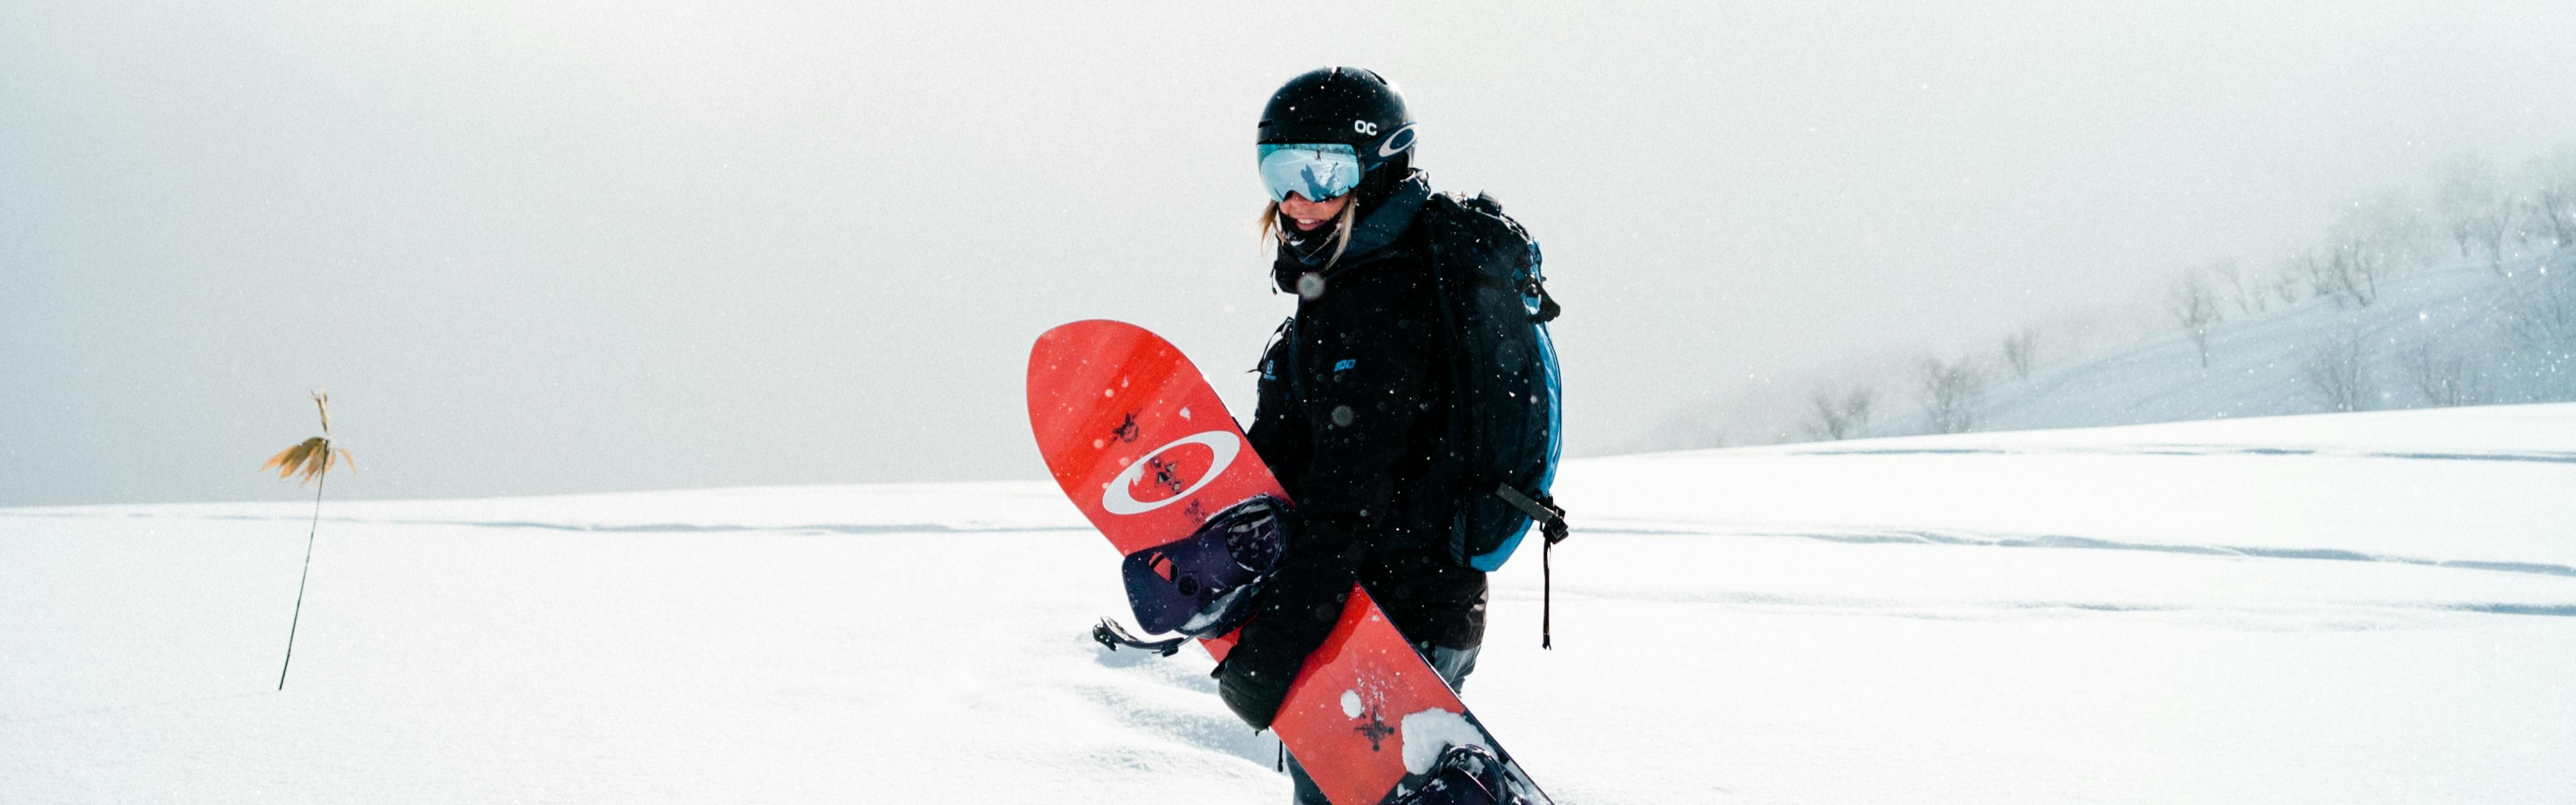 The Best Womens Snowboard Gear Curated